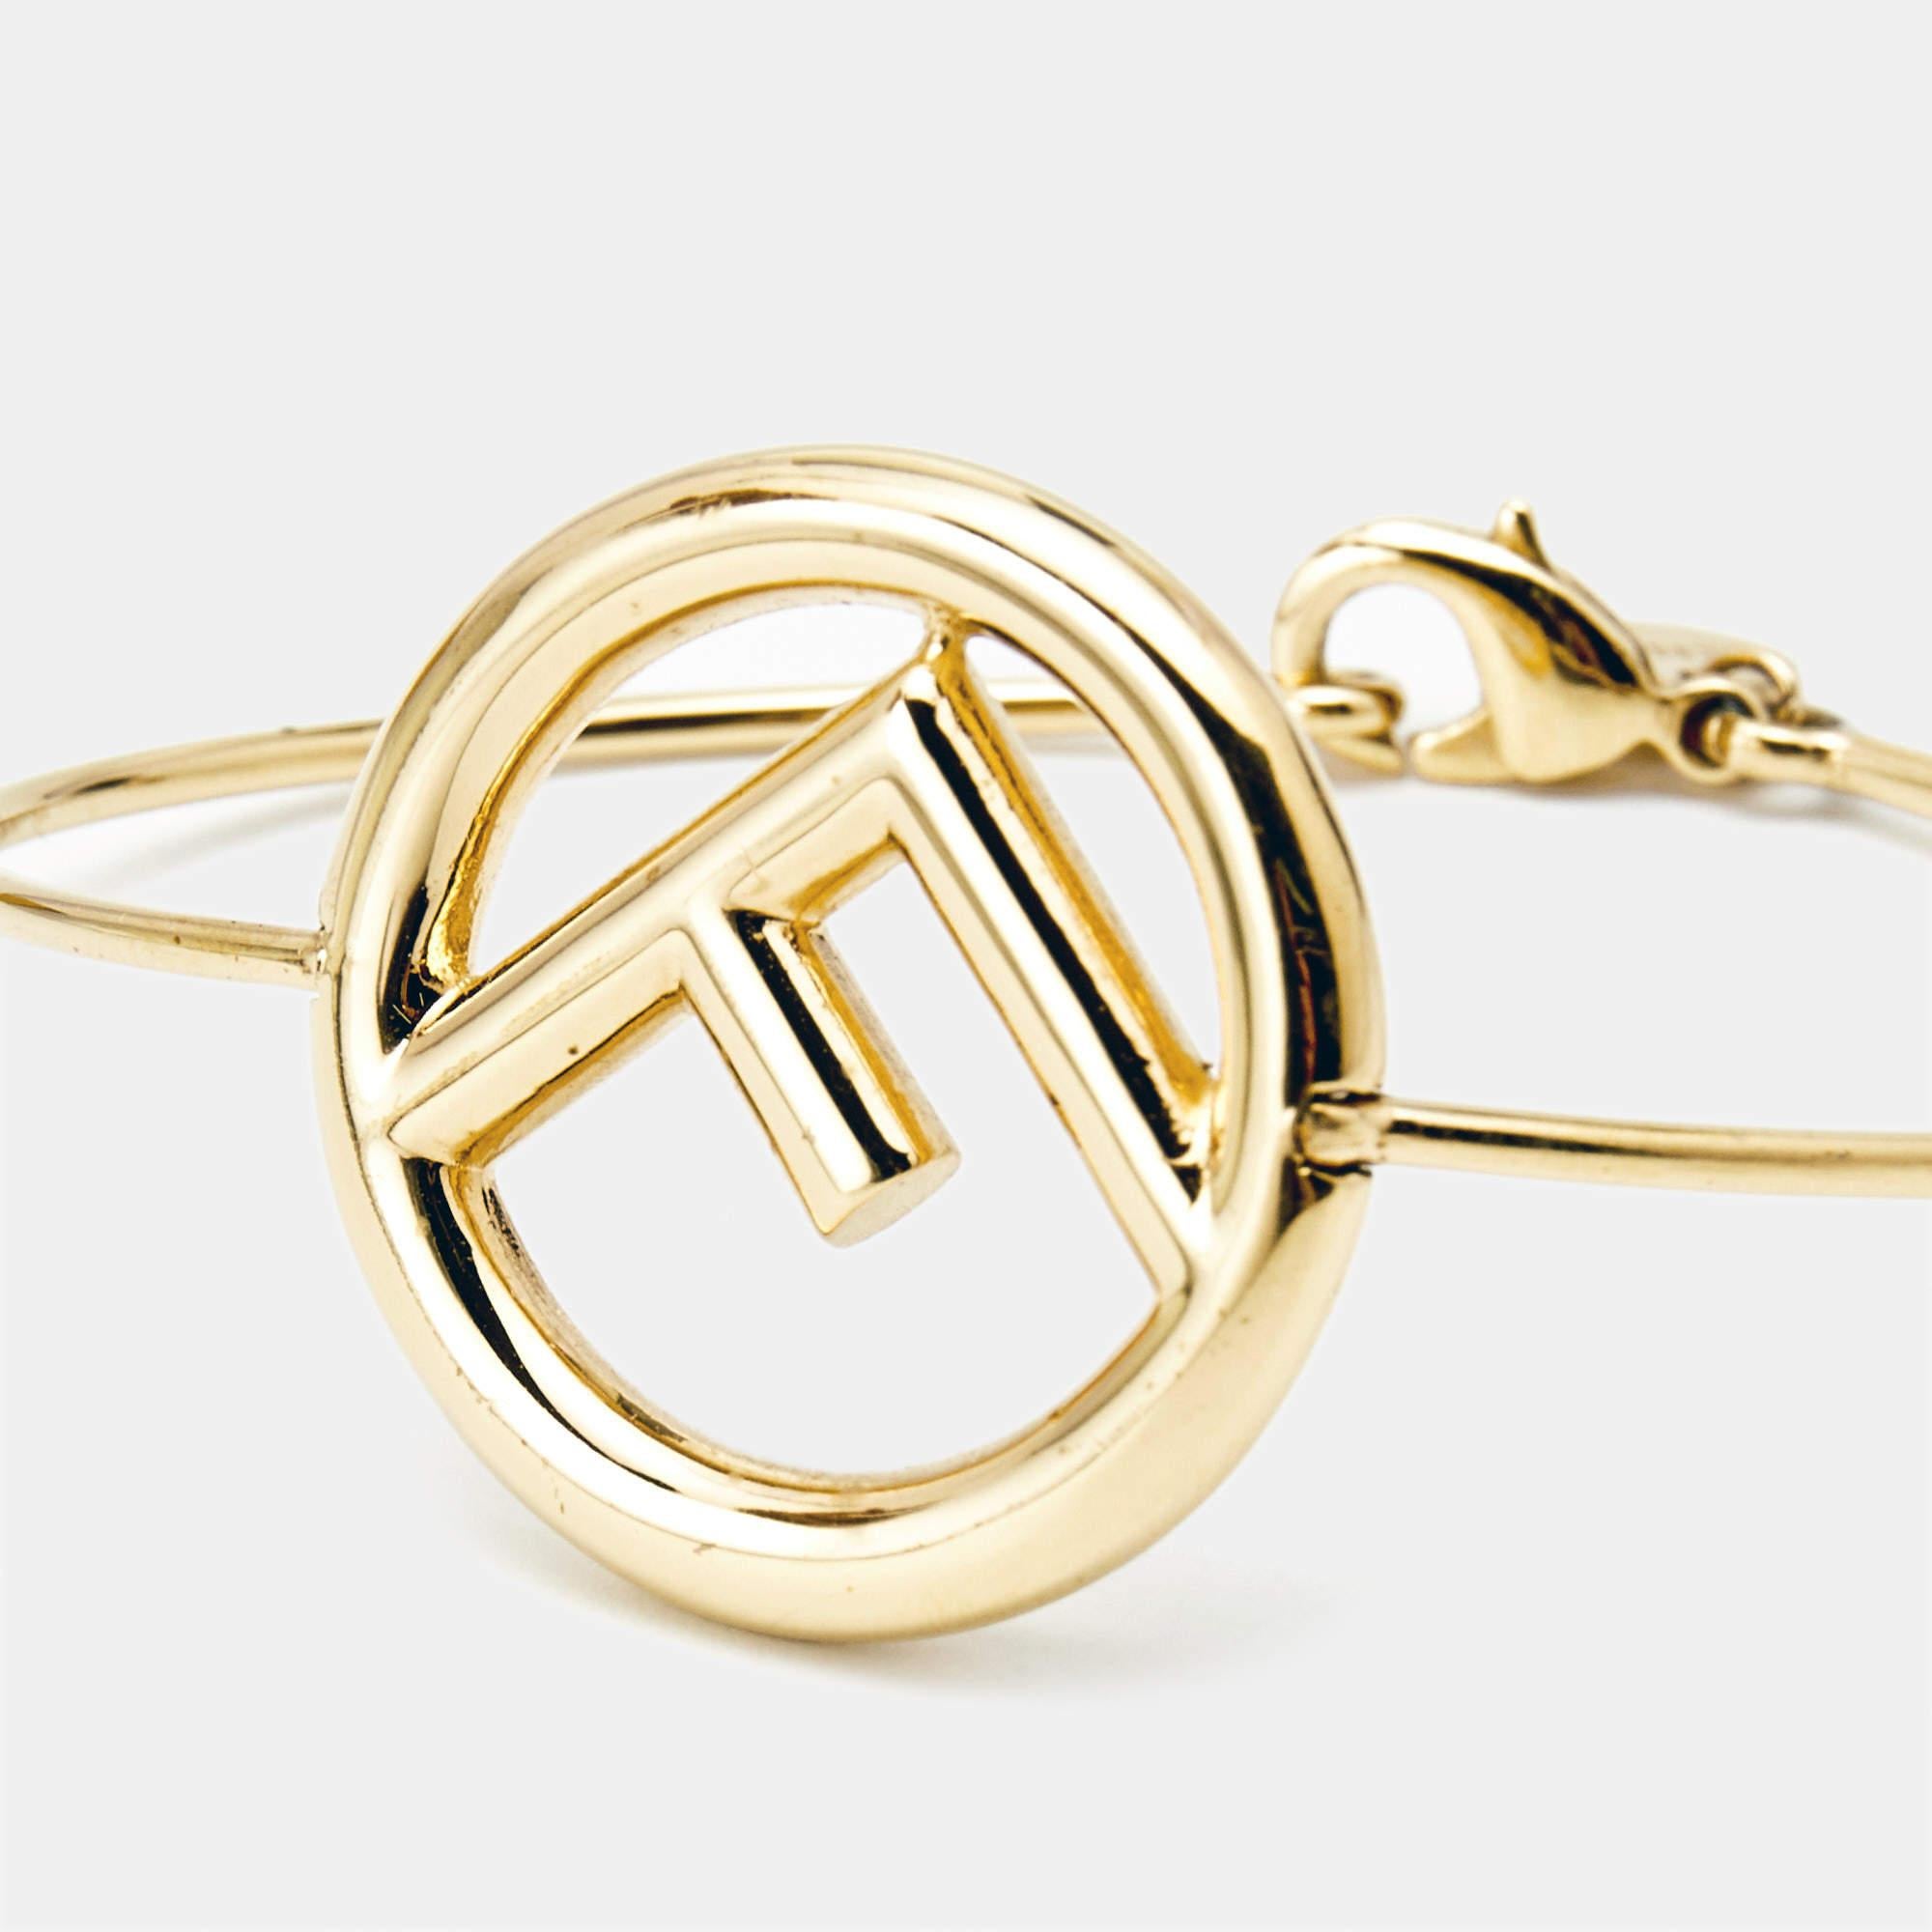 Dainty and beautiful, this 'F is Fendi' bracelet from Fendi is an outstanding piece worth adding to your accessories collection. It comes crafted from gold-tone metal and styled with the signature inverted F logo. It is fastened using a lobster